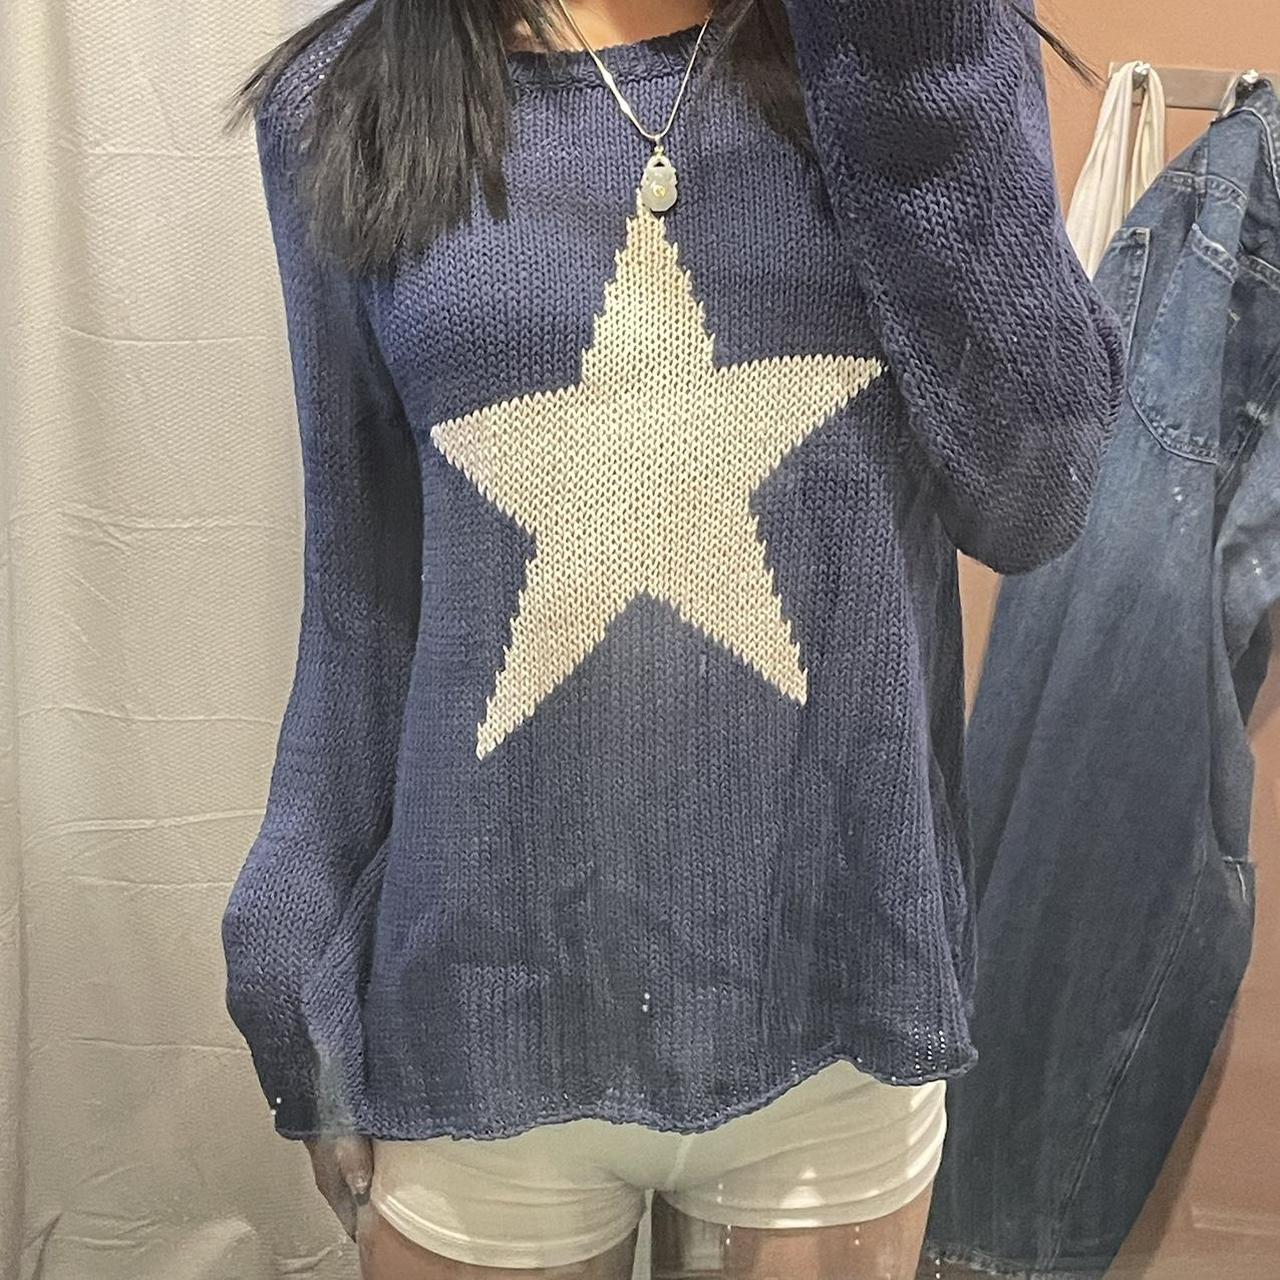 Anthropologie Women's Blue and White Jumper (4)